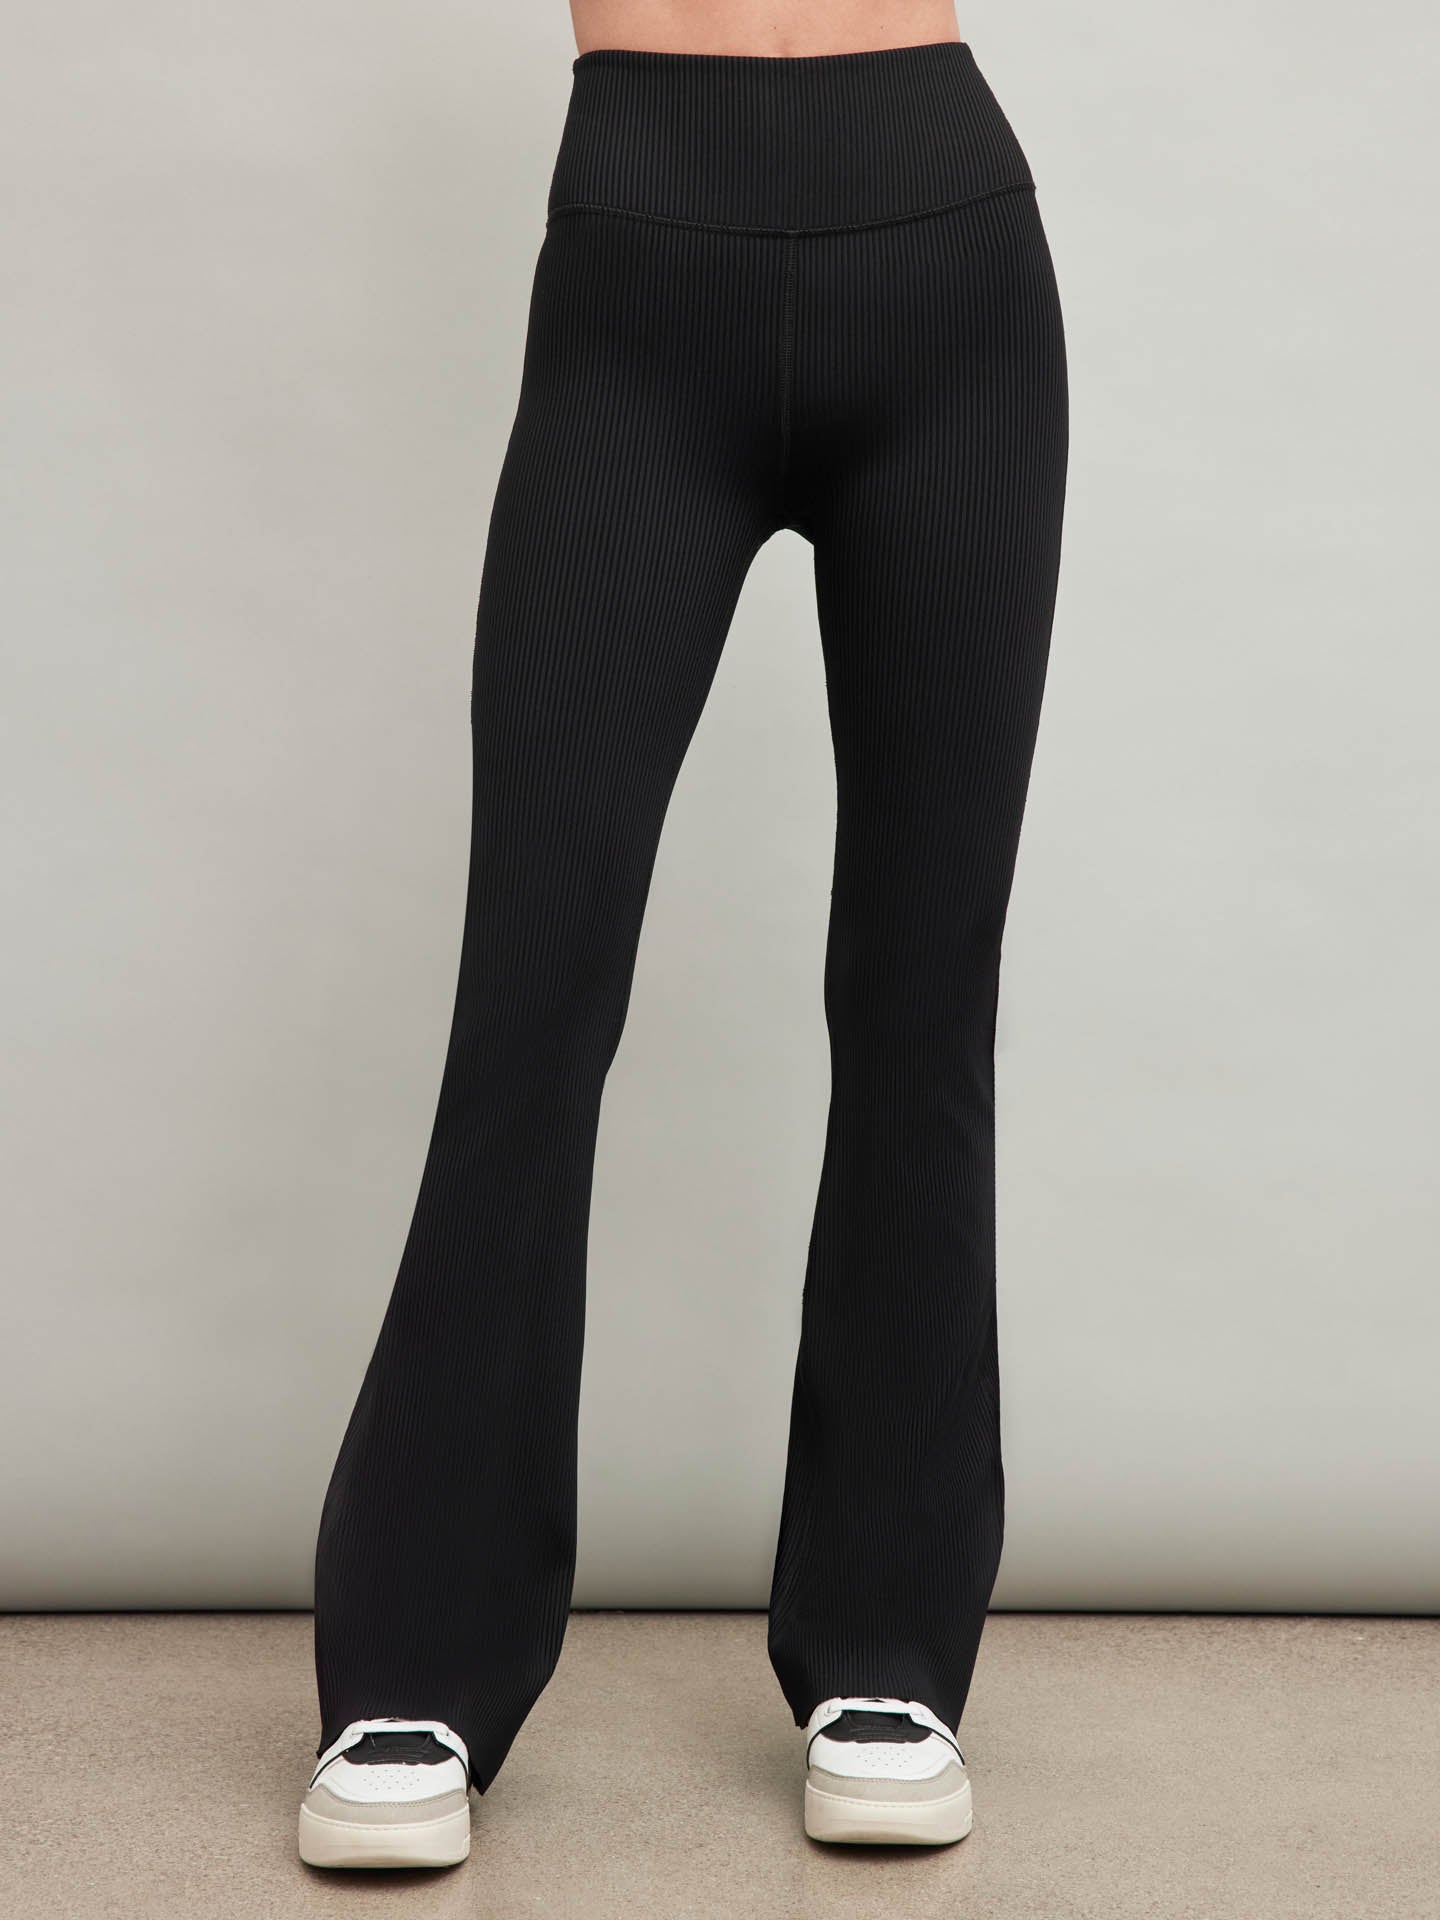 Carbon38 High Rise Flare Pants In Diamond Compression - Black